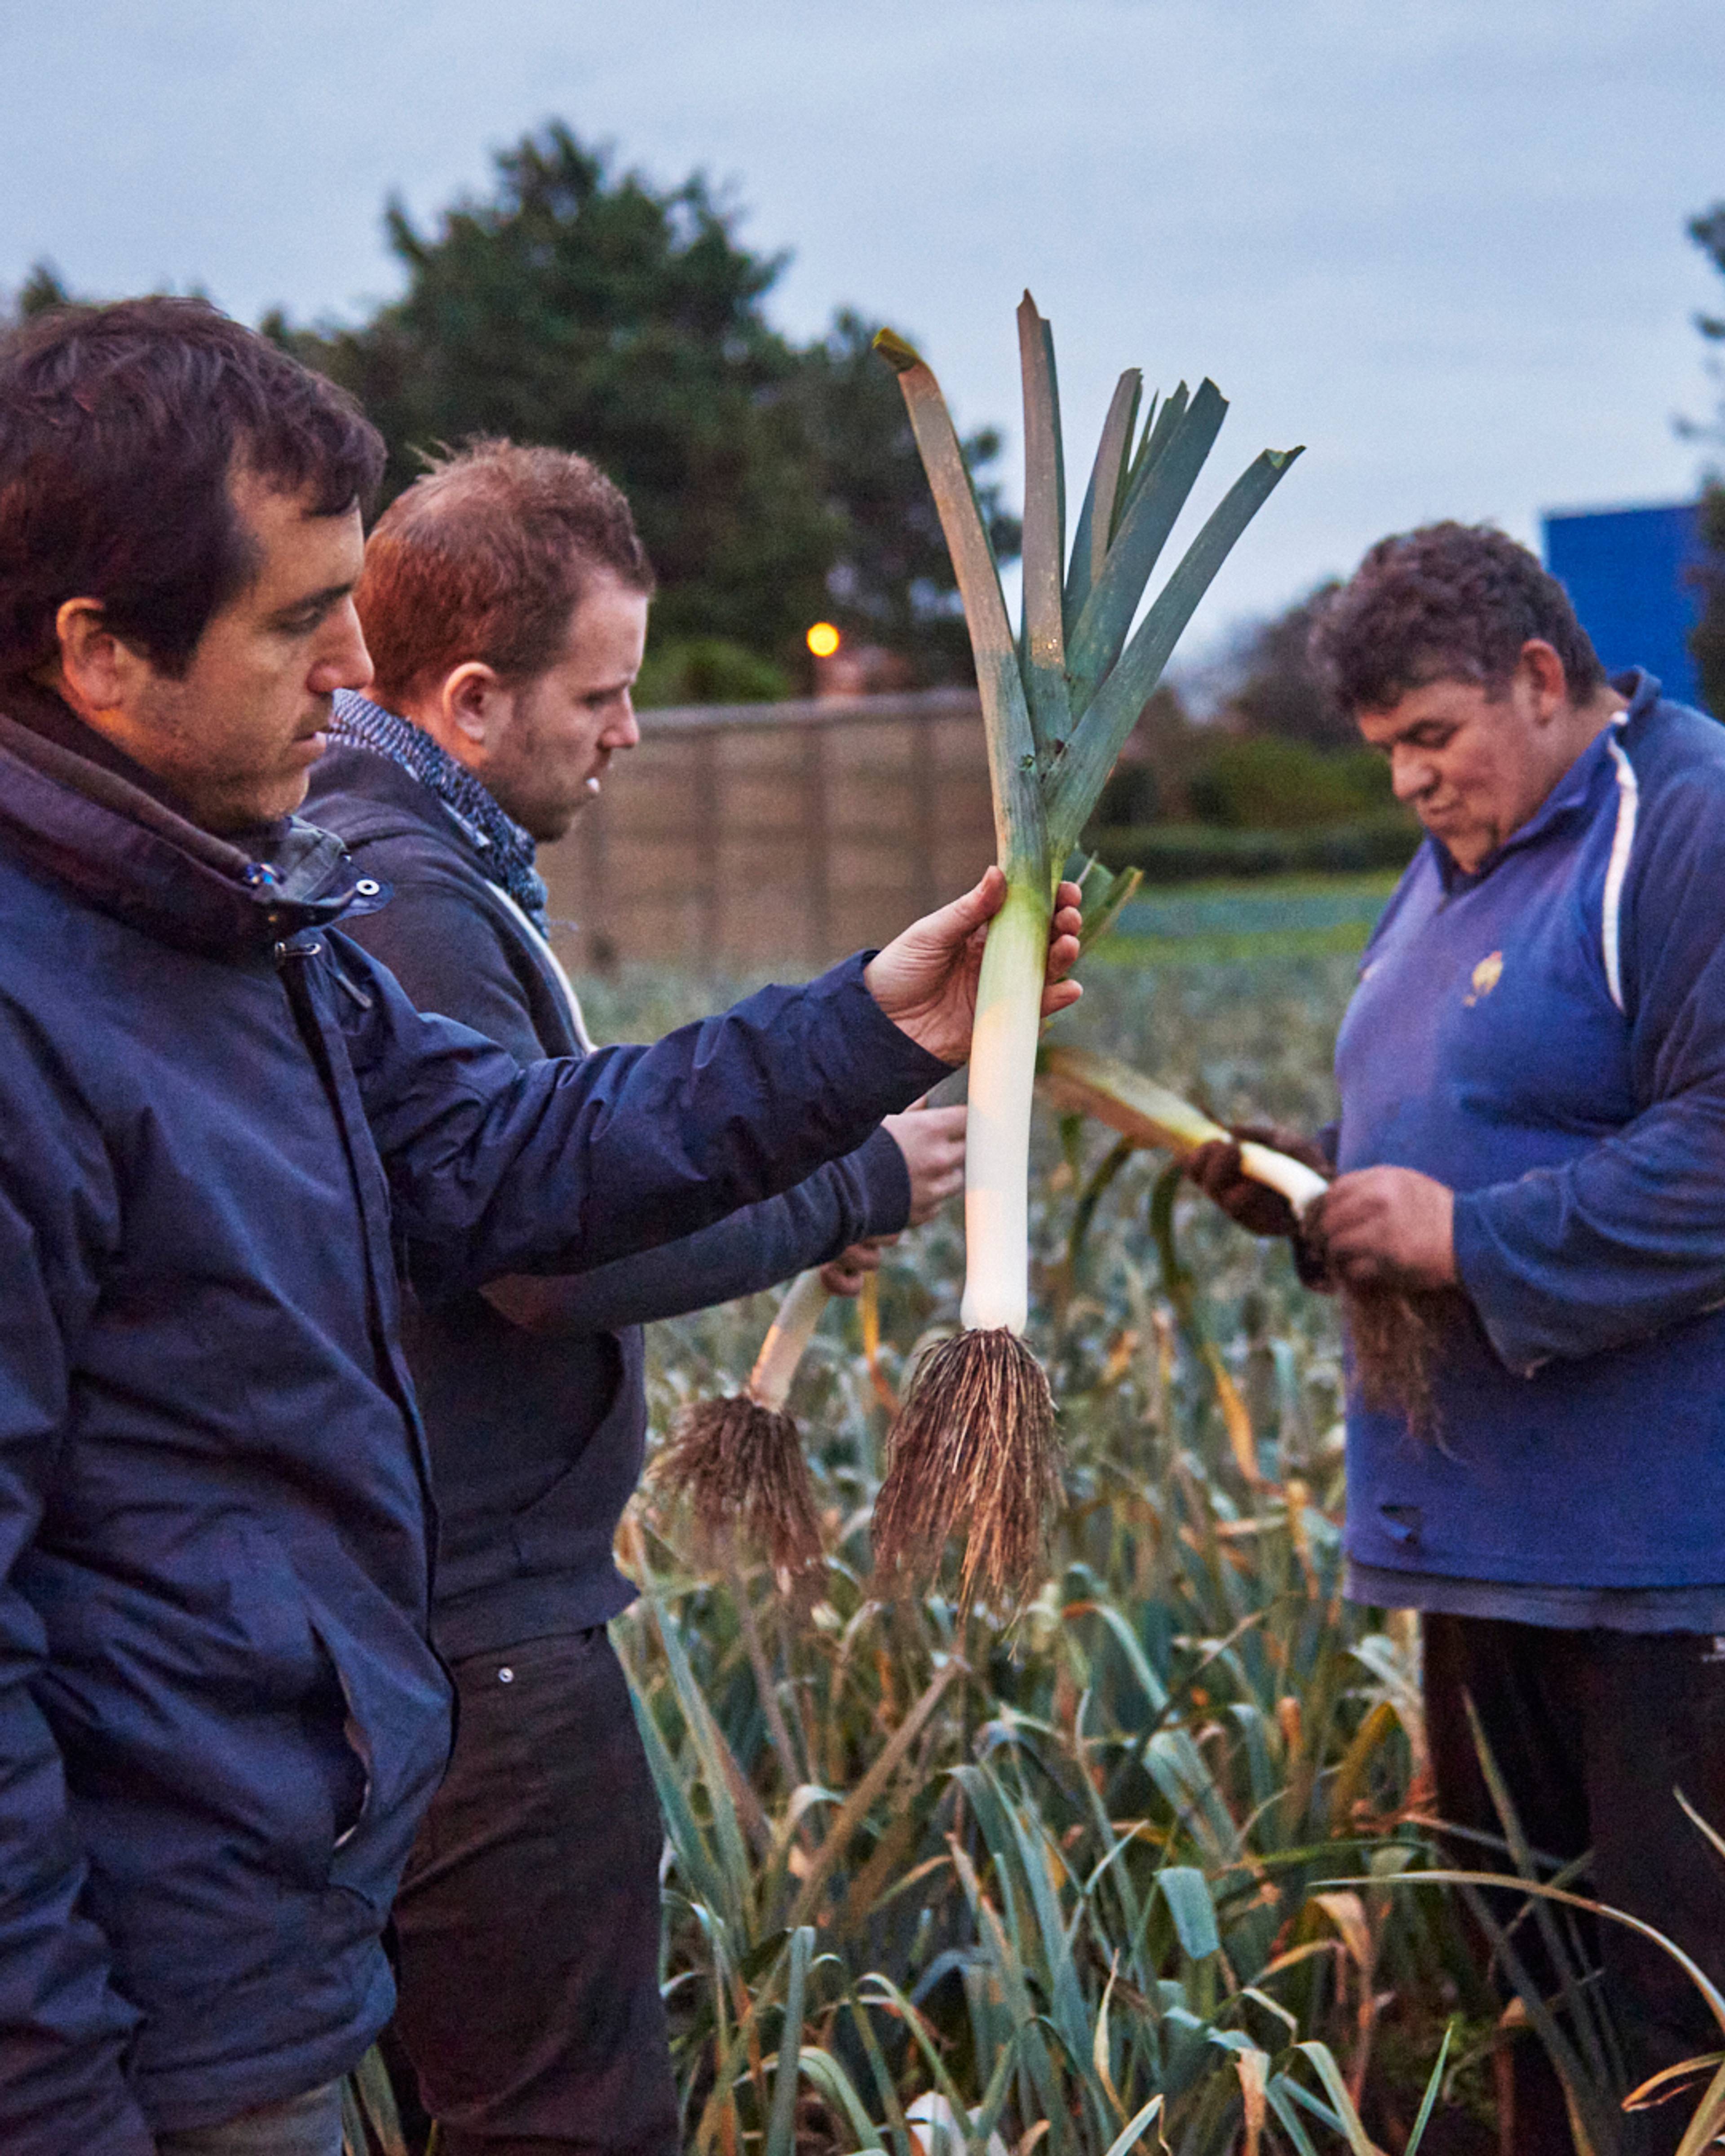 Franco and team visiting a French grower, holding up a freshly harvested leek